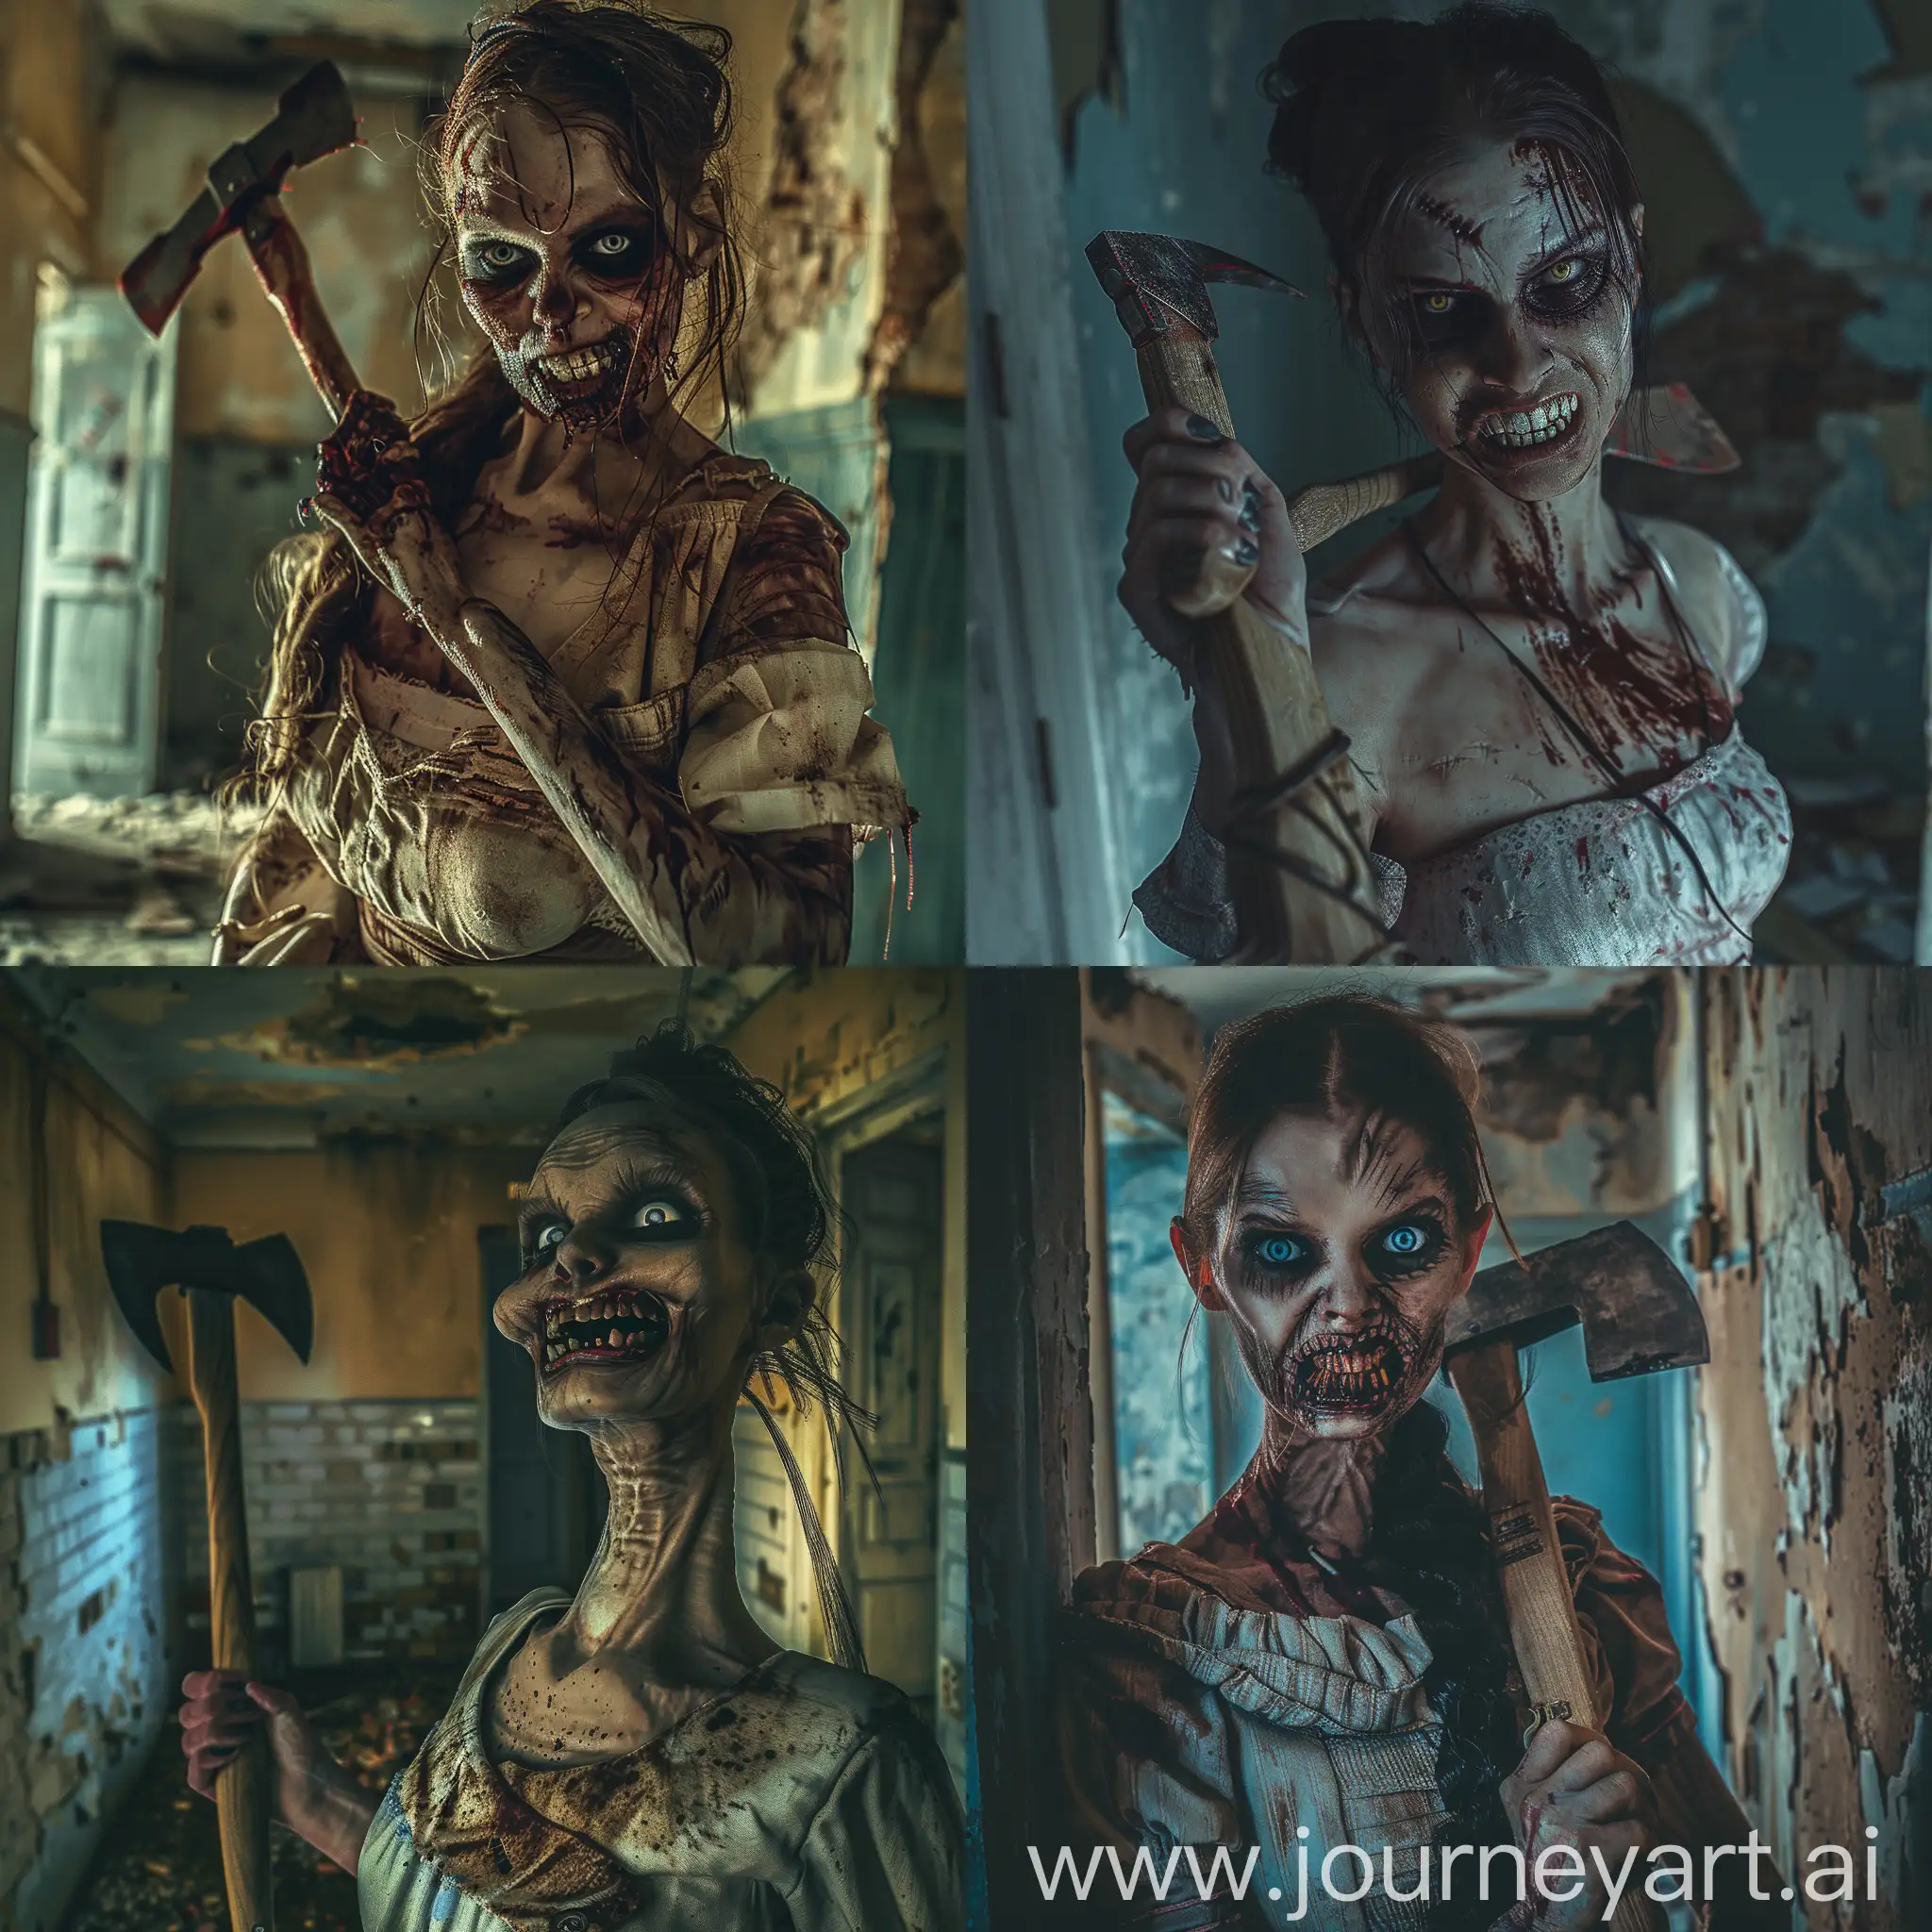 Woman with long neck, informal teeth and evil eyes, wearing asylum attire, she has a hatchet on her hand, bloody, dark asylum, ruined area, scary movie scene, creepy, dark eerie, psychological, madness, cinematic lighting, realistic image